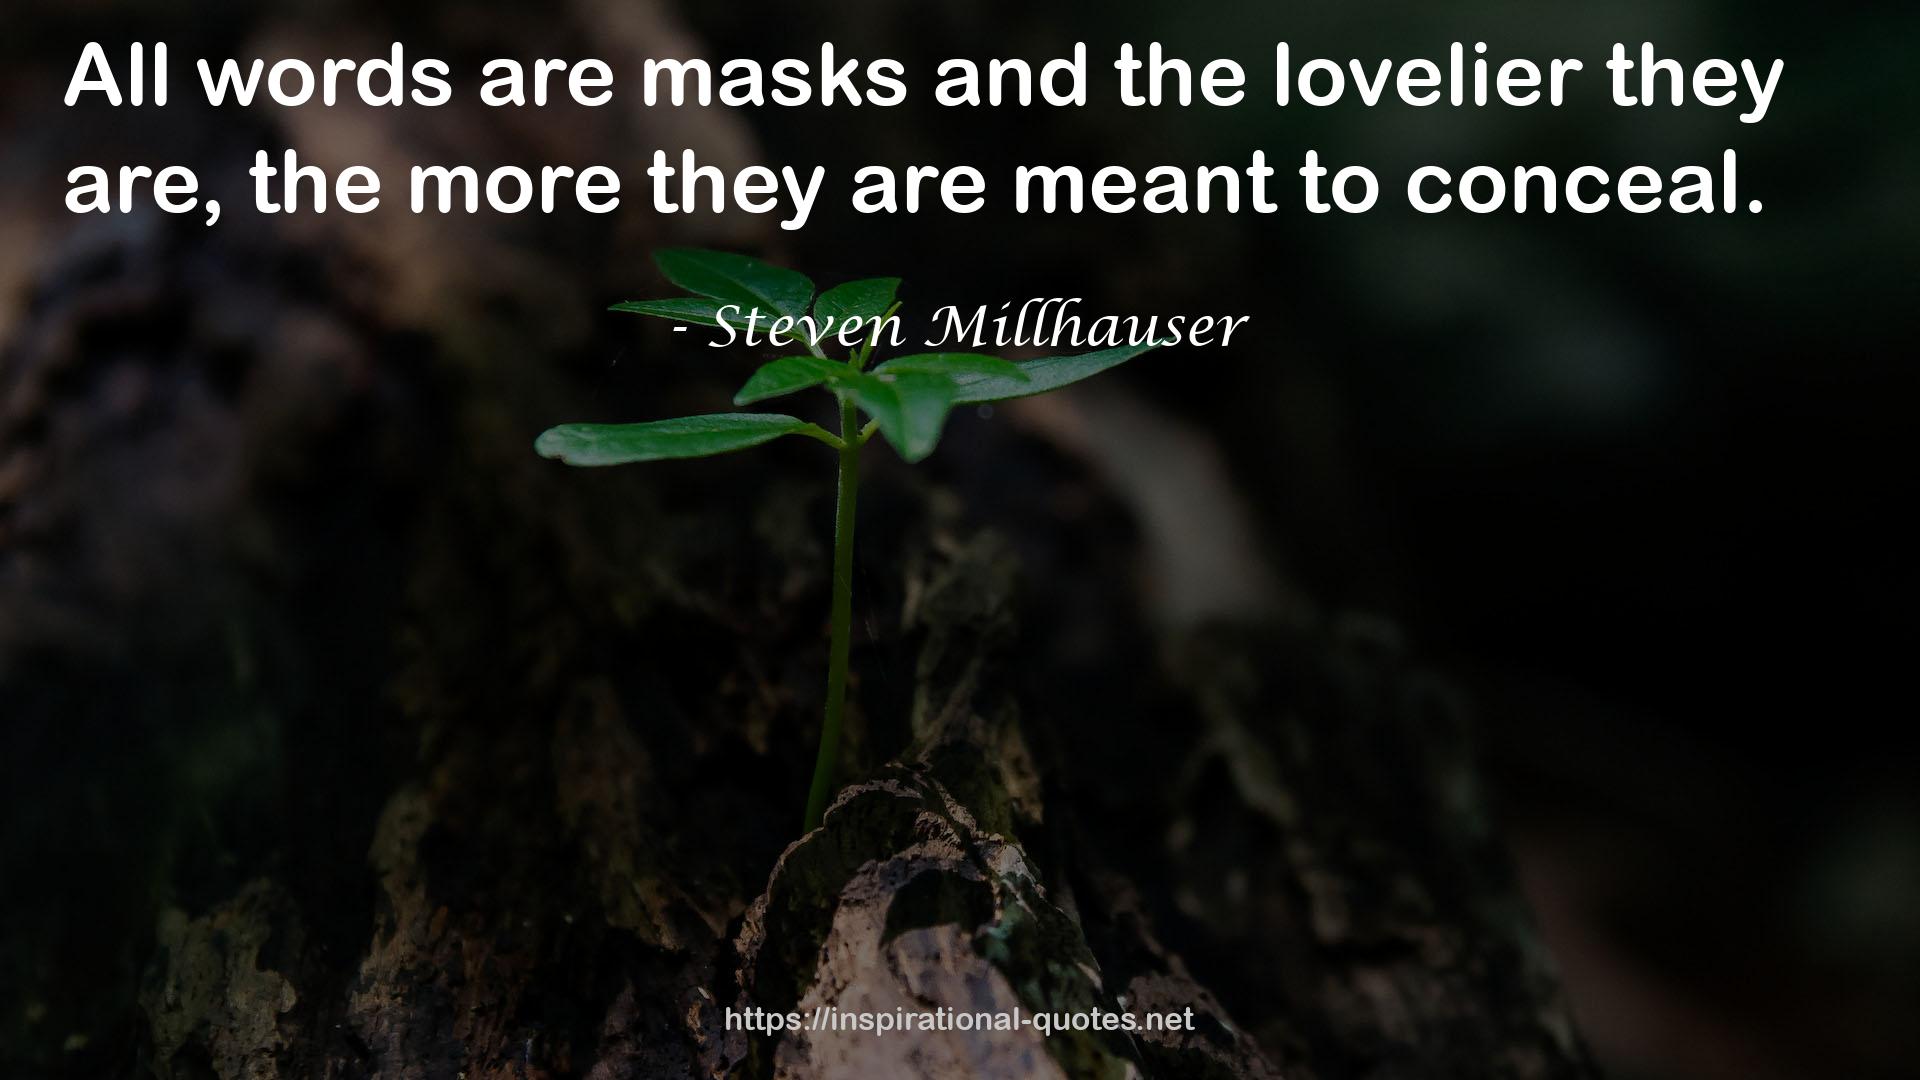 Steven Millhauser QUOTES